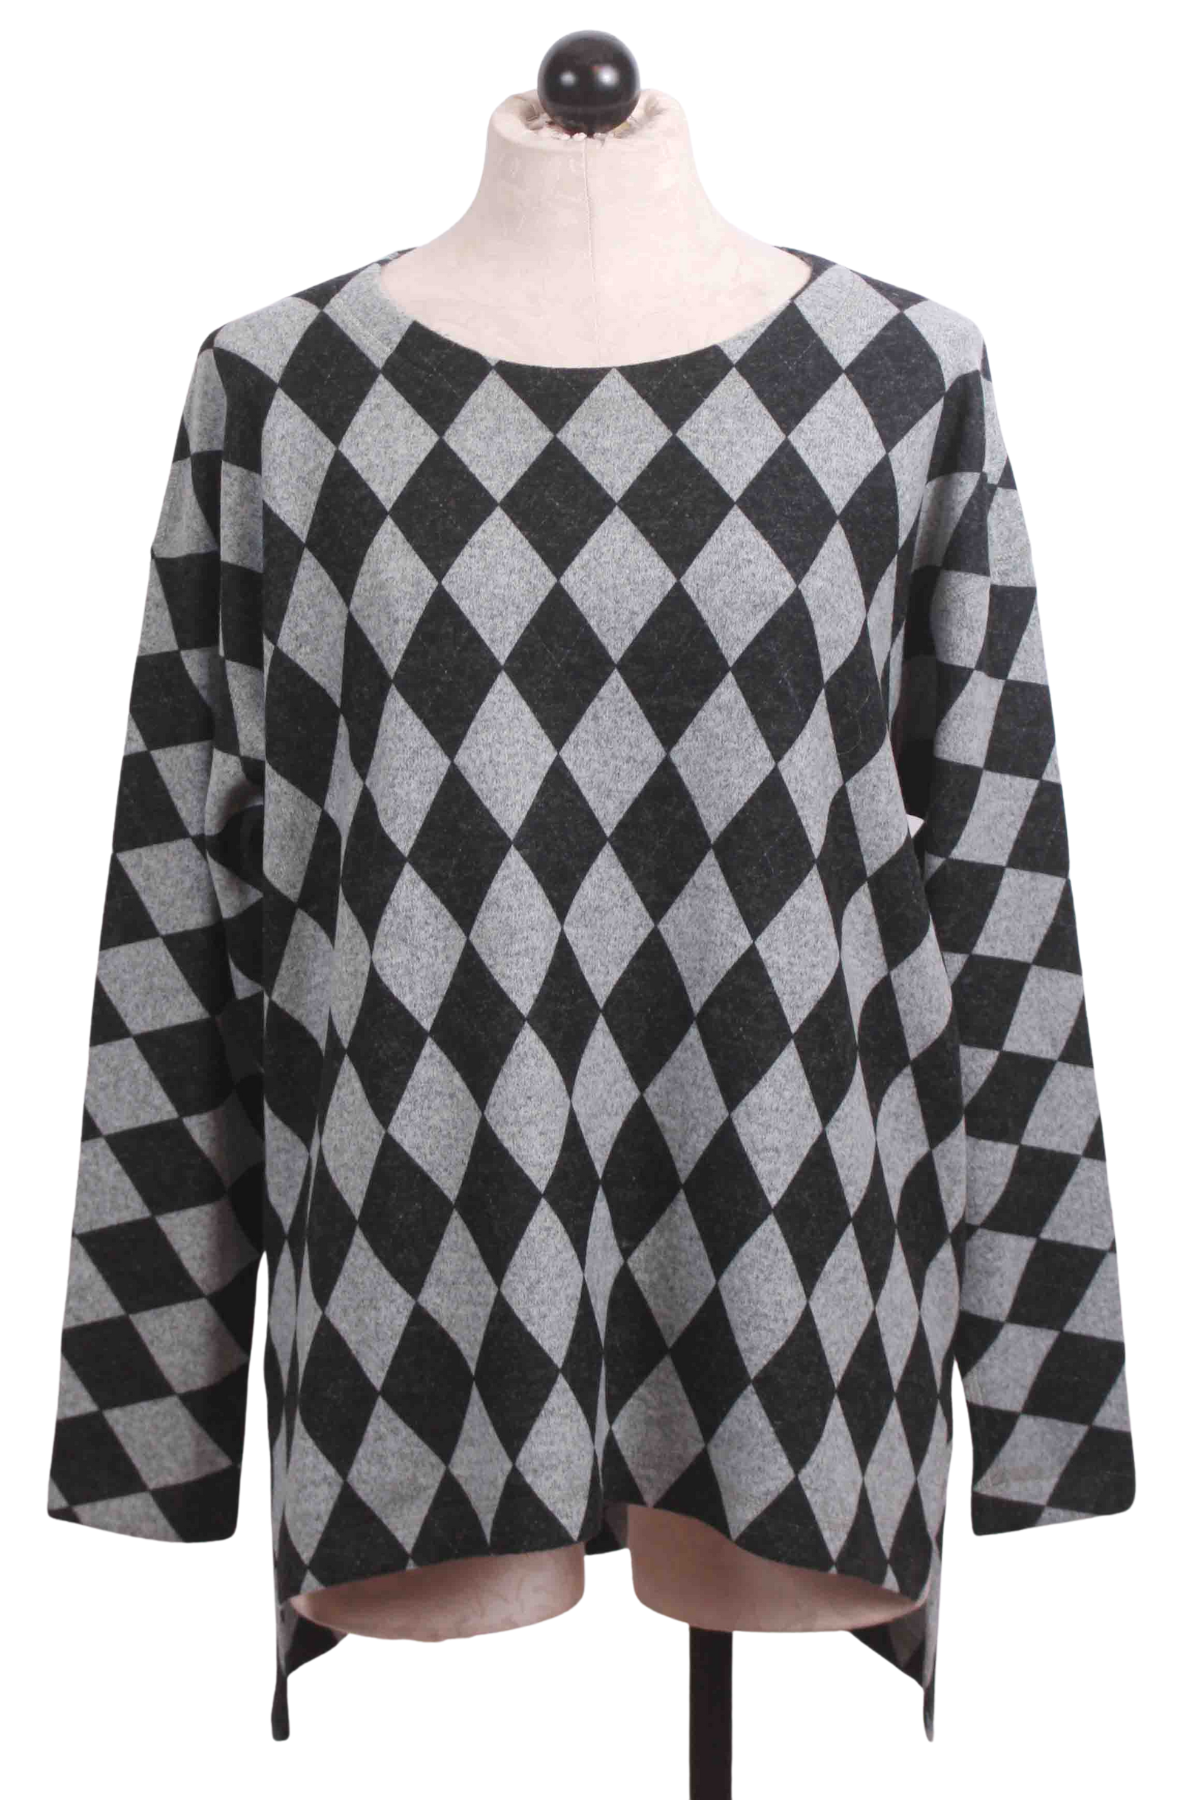 Black/Grey Brushed Argyle Long Sleeve Top by Nally and Millie